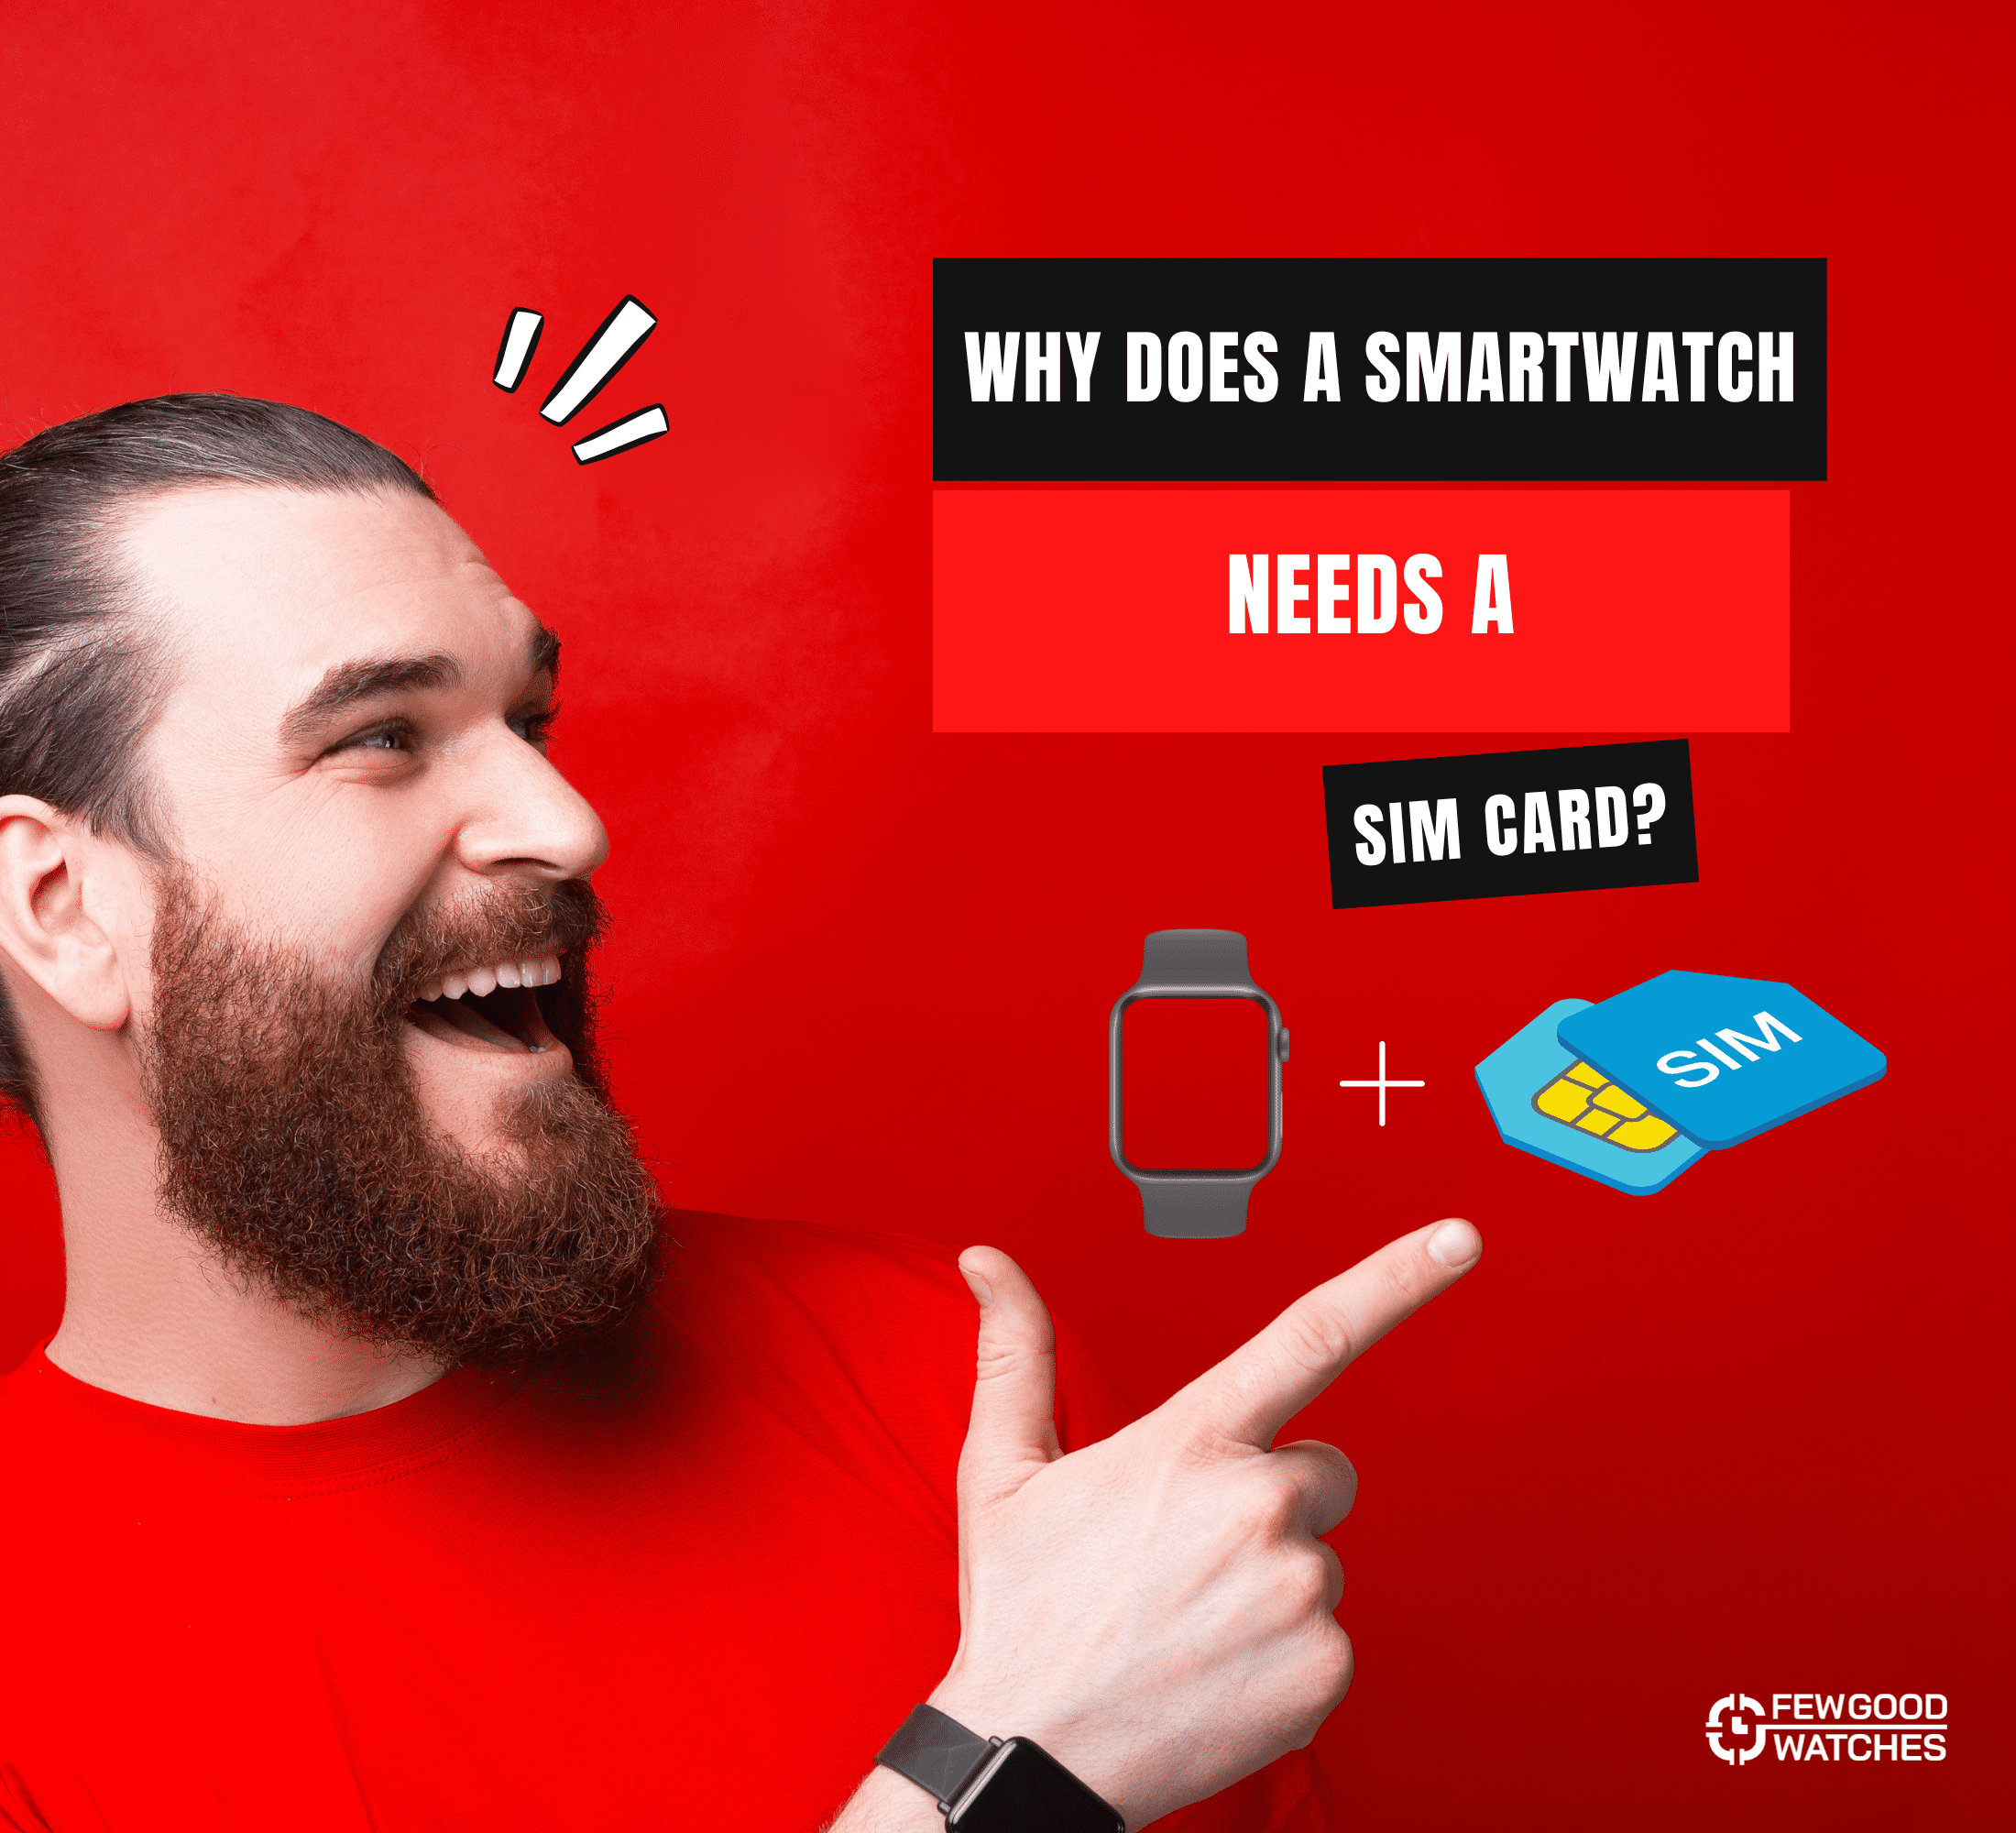 why does a smartwatch needs a sim card - answered and explained